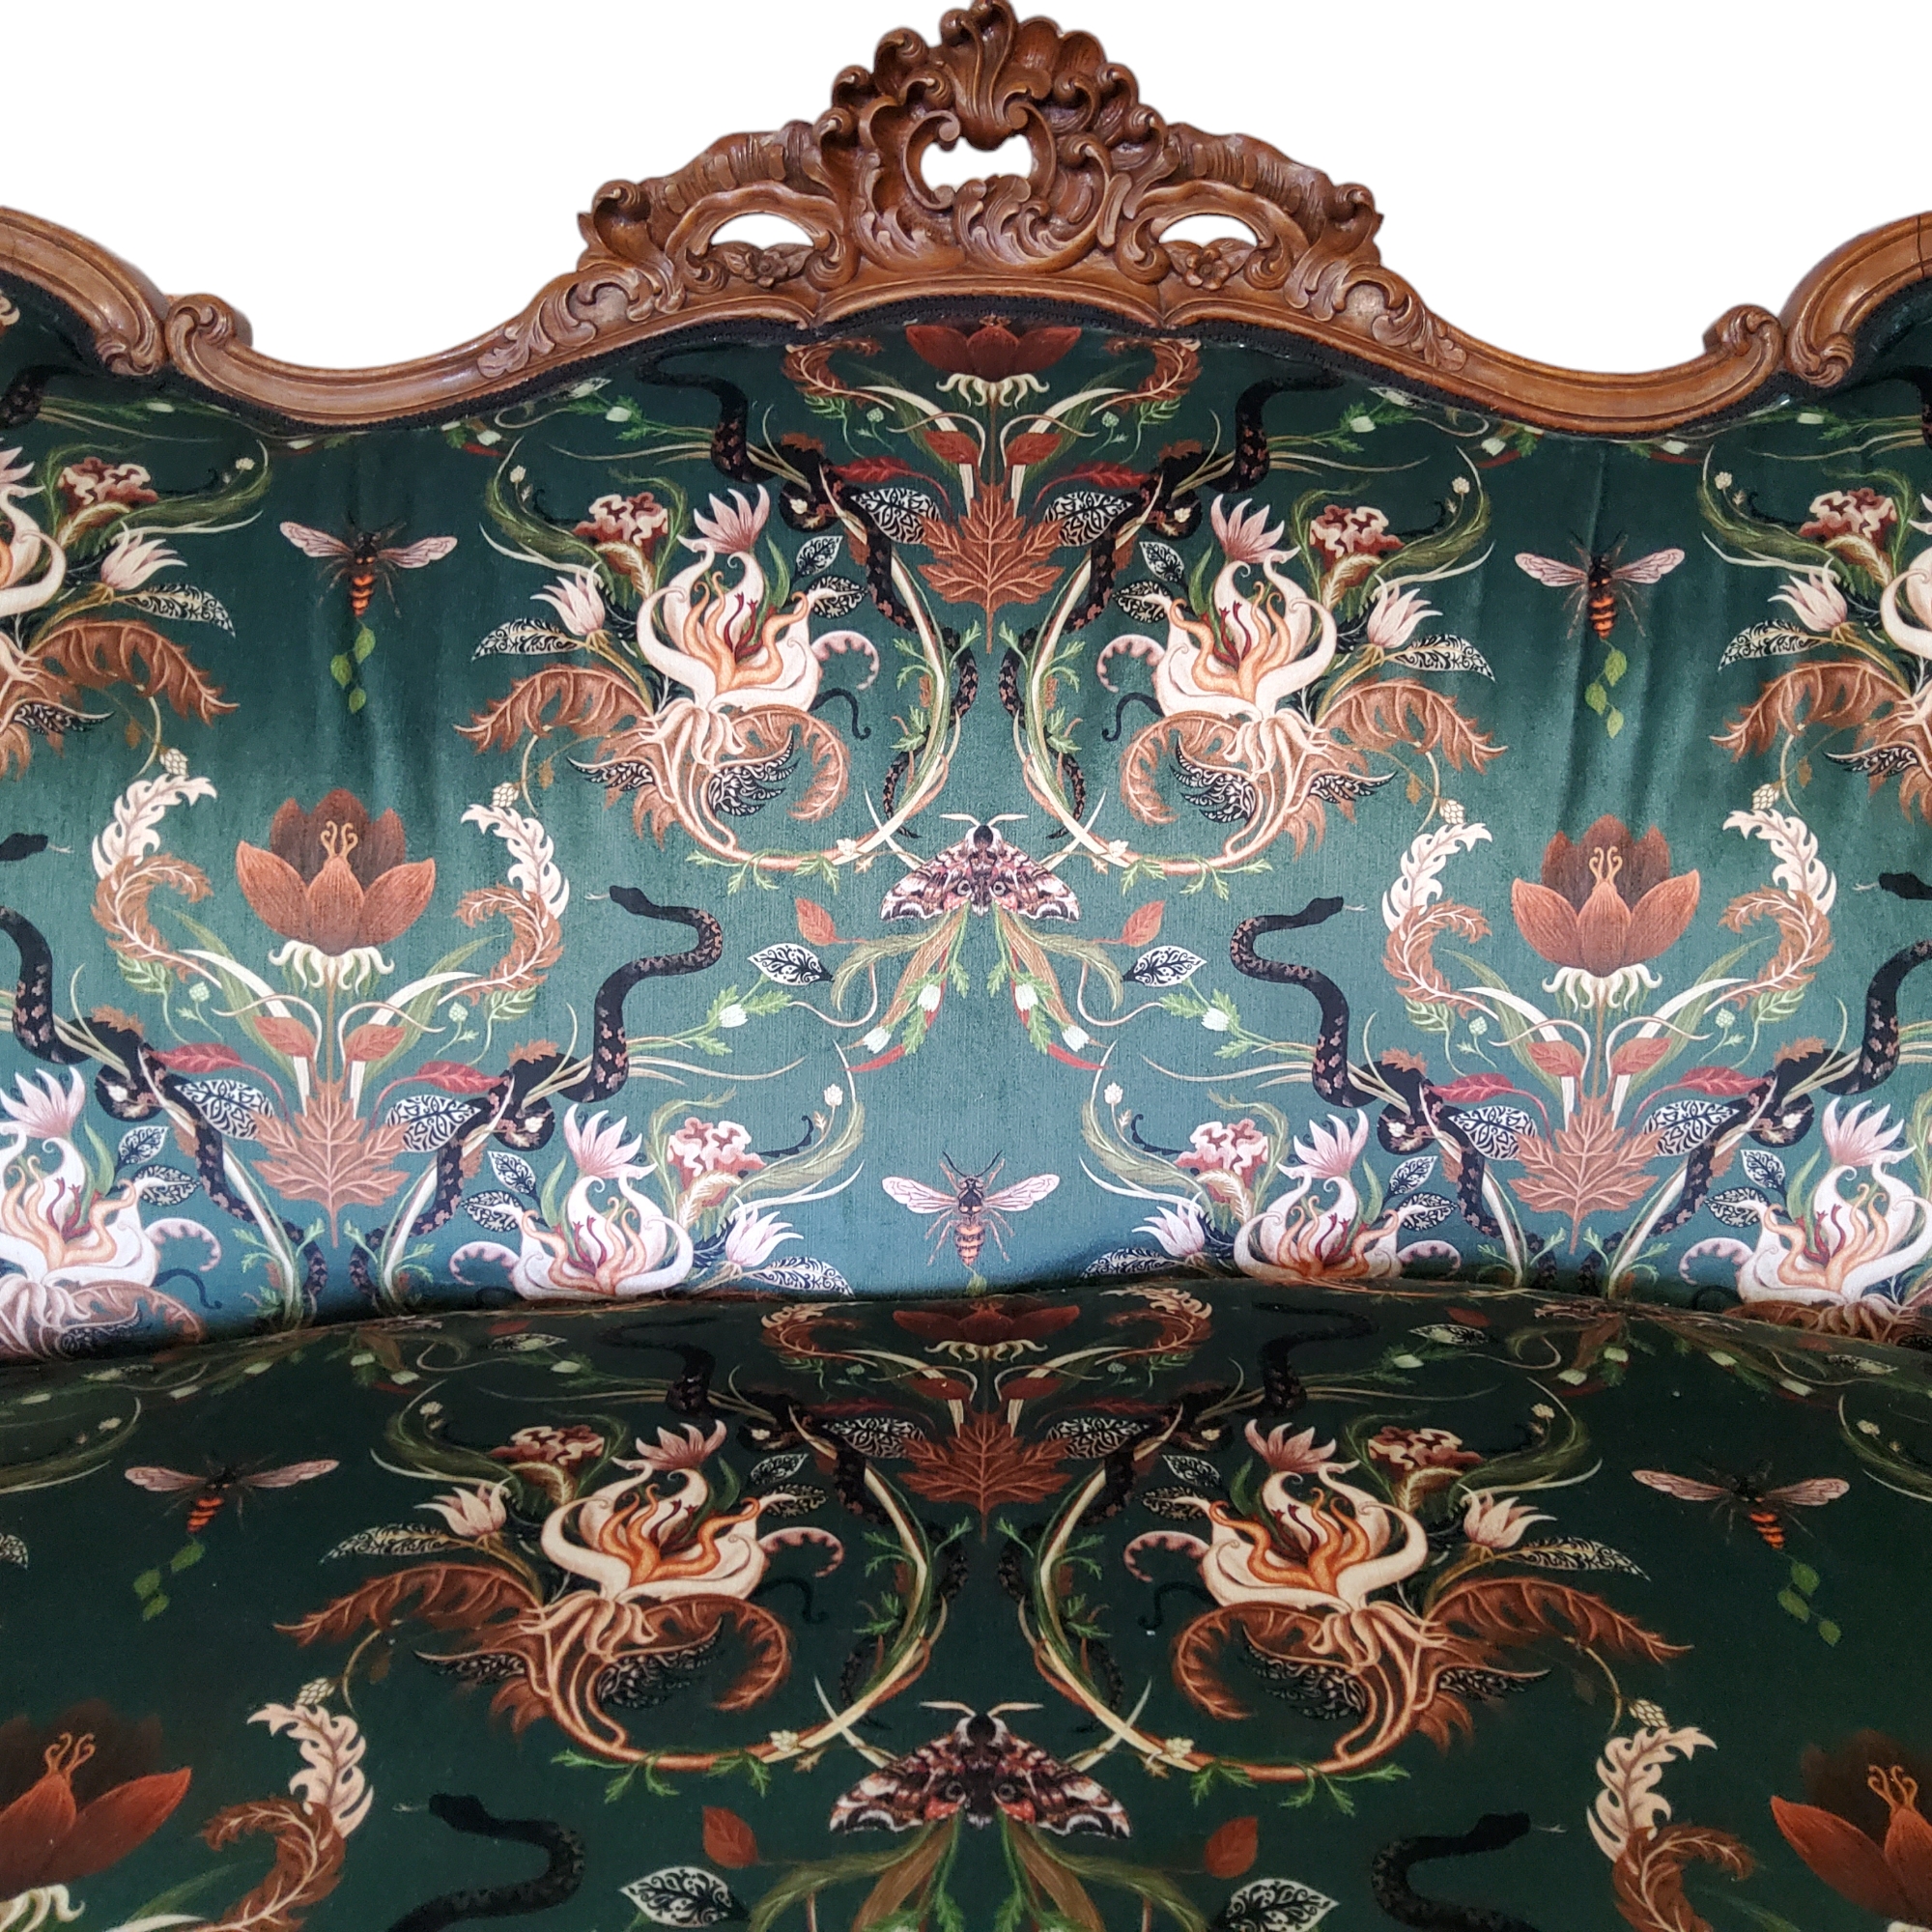 Interior Design - a 19th century French Louis XVI walnut salon sofa, traditionally upholstered - Image 3 of 3